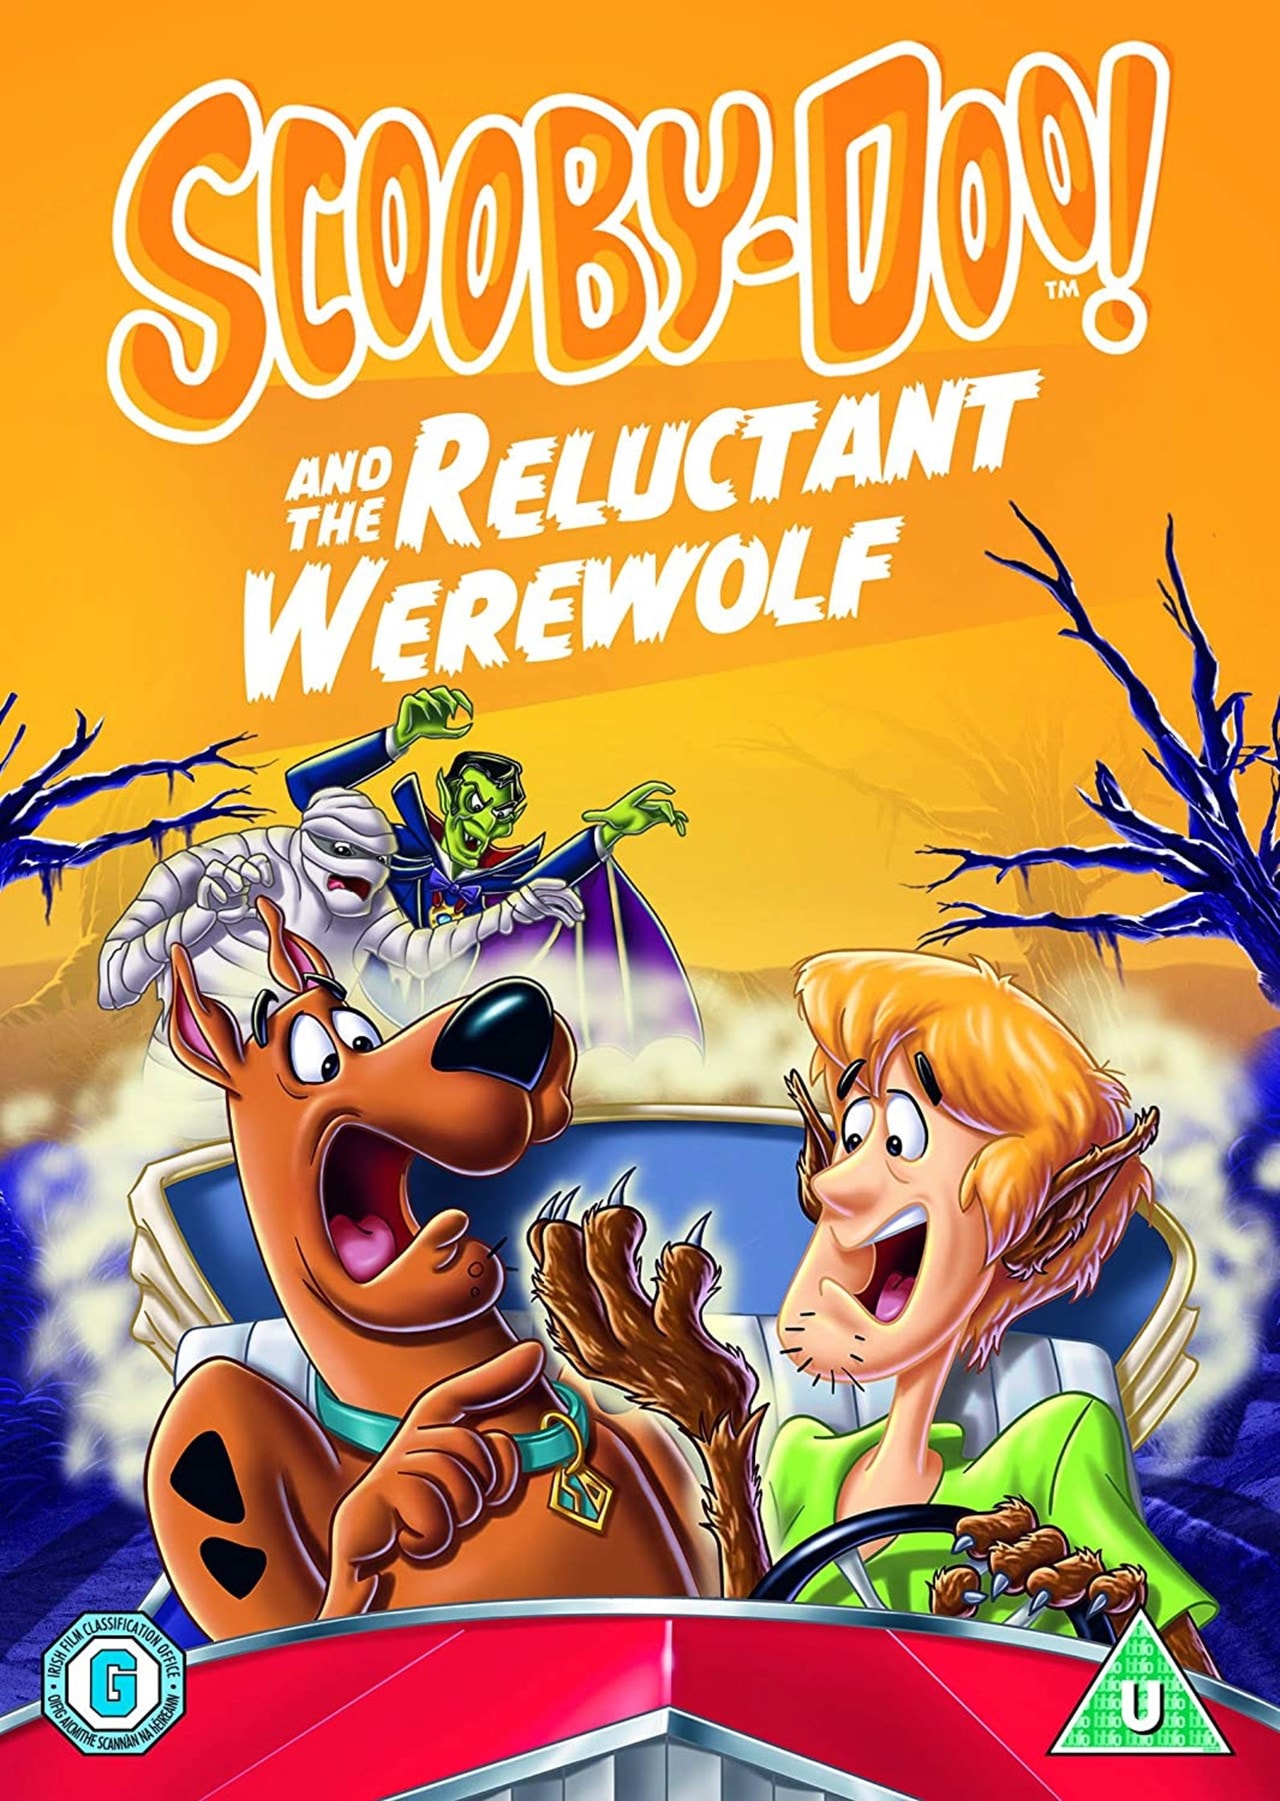 Scooby-Doo: Scooby-Doo and the Reluctant Werewolf | DVD | Free shipping